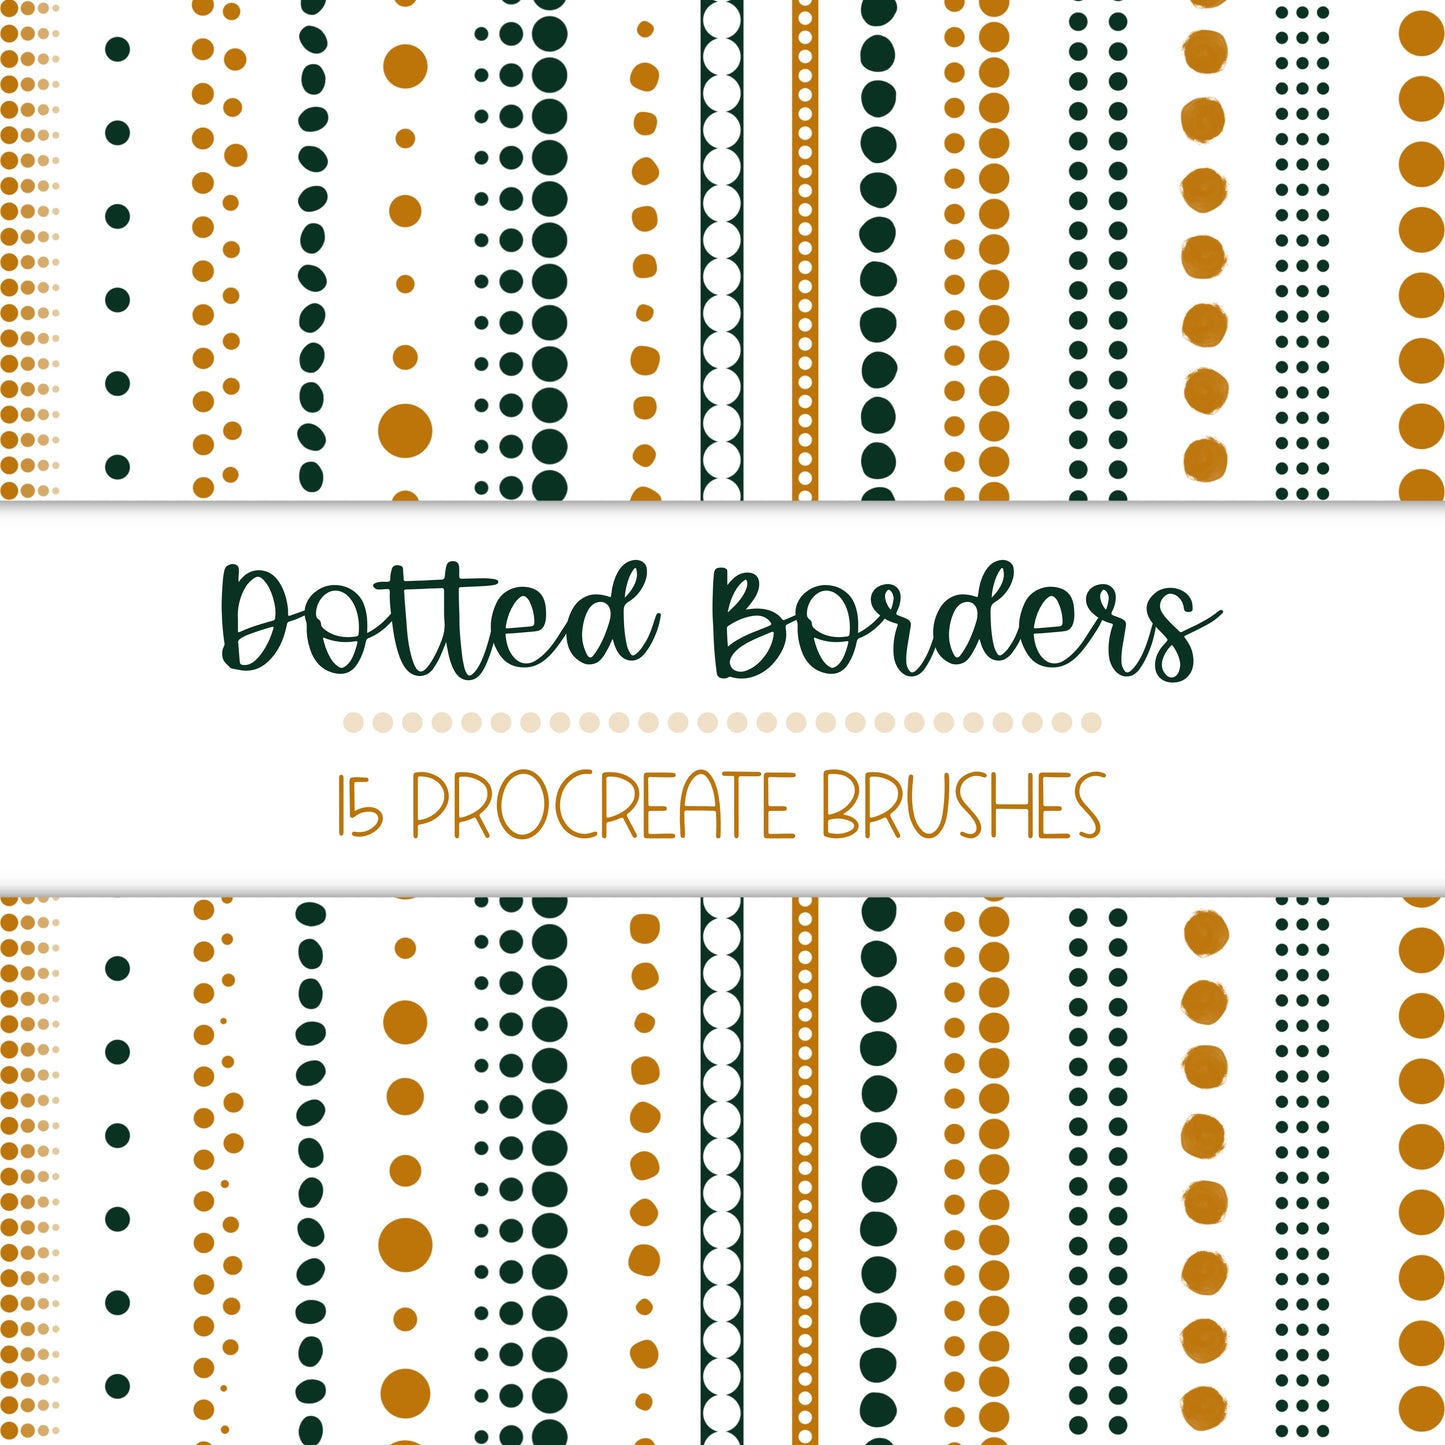 Dotted Border Brushes